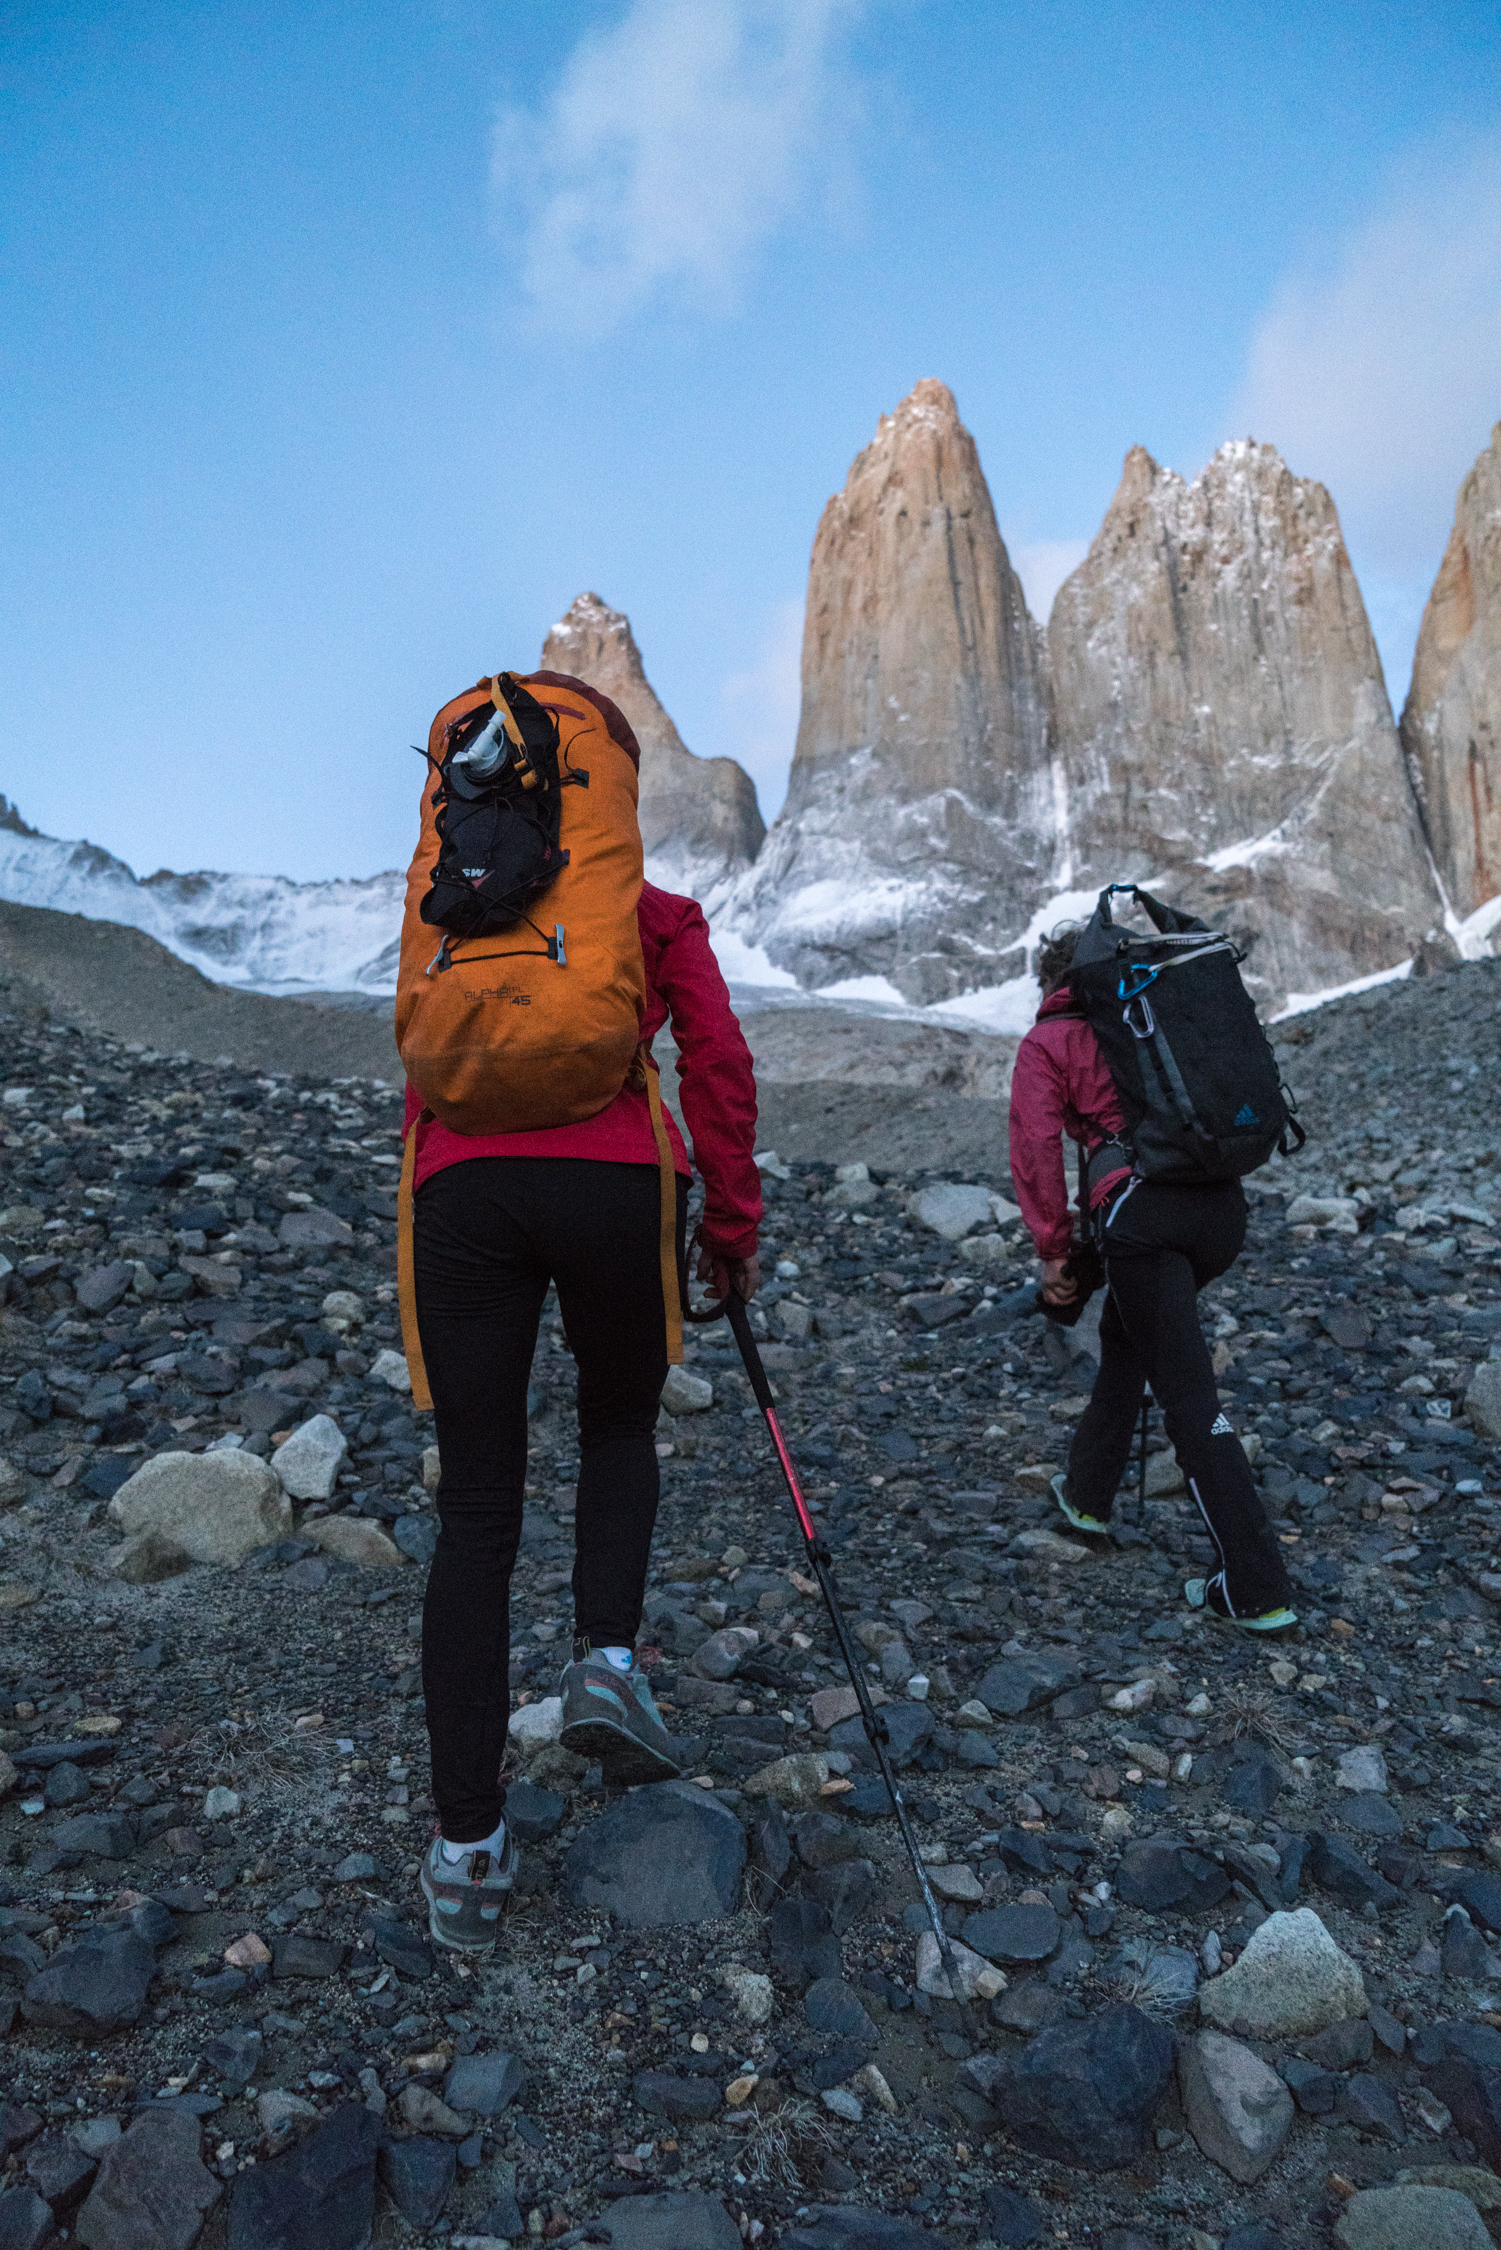 Approaching the Torres del Paine: Torre Central is in the middle. [Photo] Drew Smith